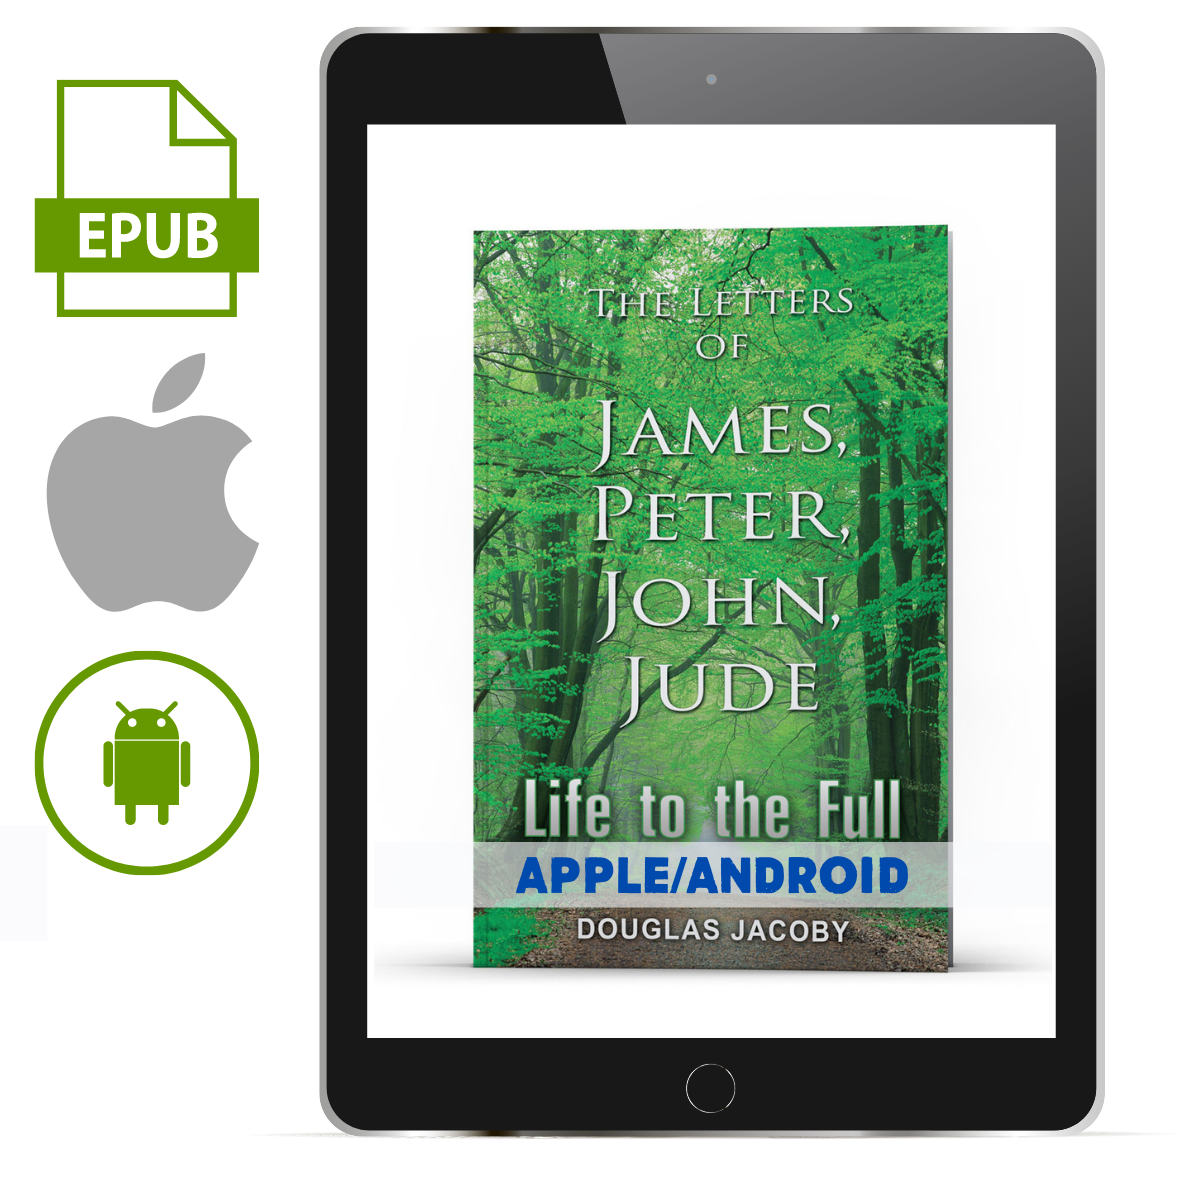 Life to the Full: The Letters of James, Peter, John, Jude Apple/Android - Illumination Publishers